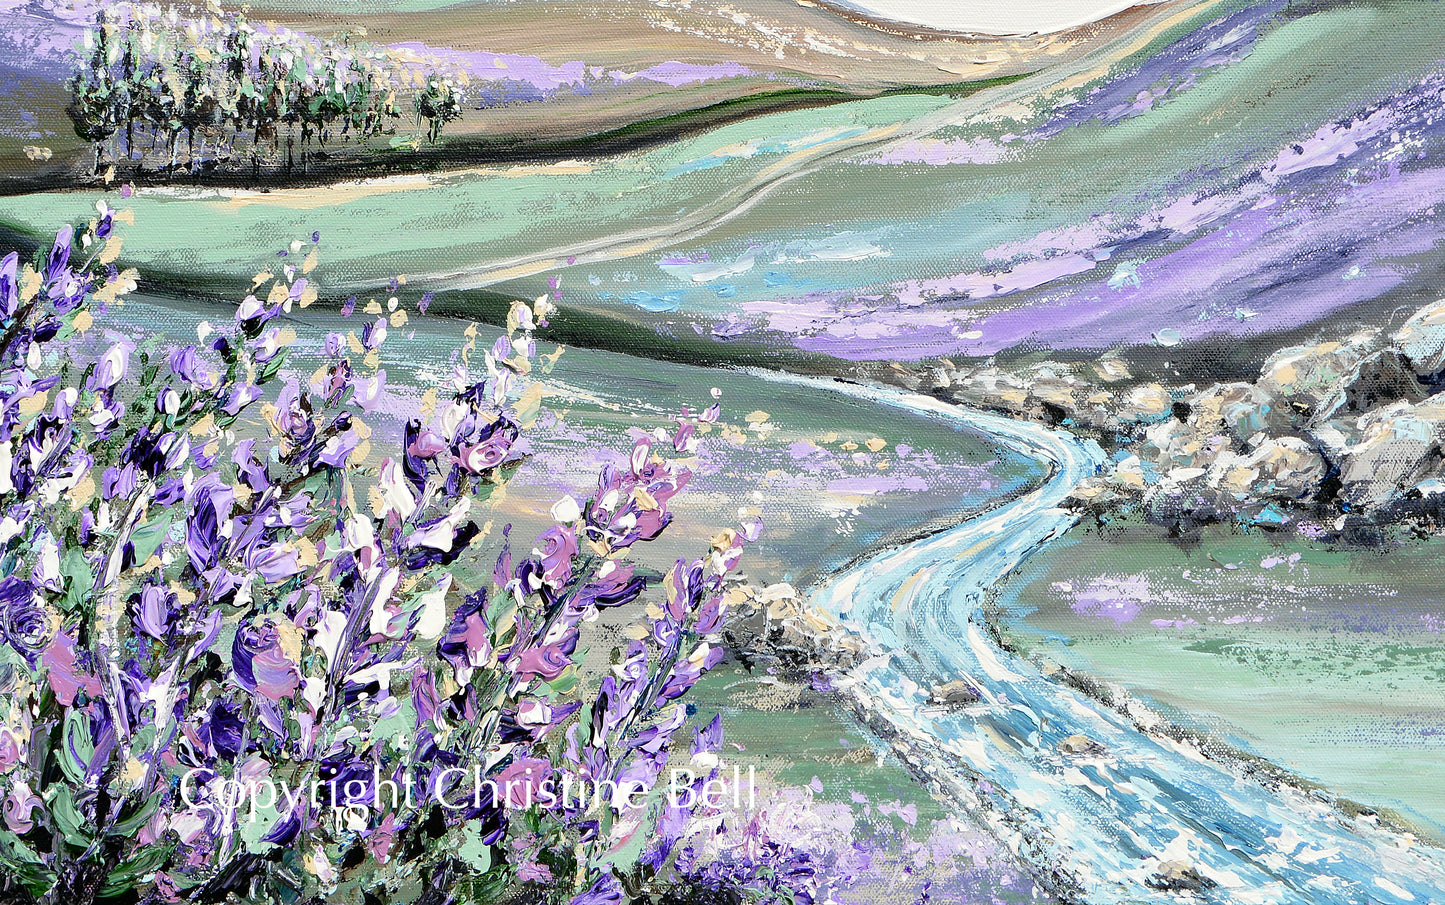 "Laced in Lavender" ORIGINAL Art Abstract Landscape Painting Textured Lavender Flowers River Horizon 30x24"